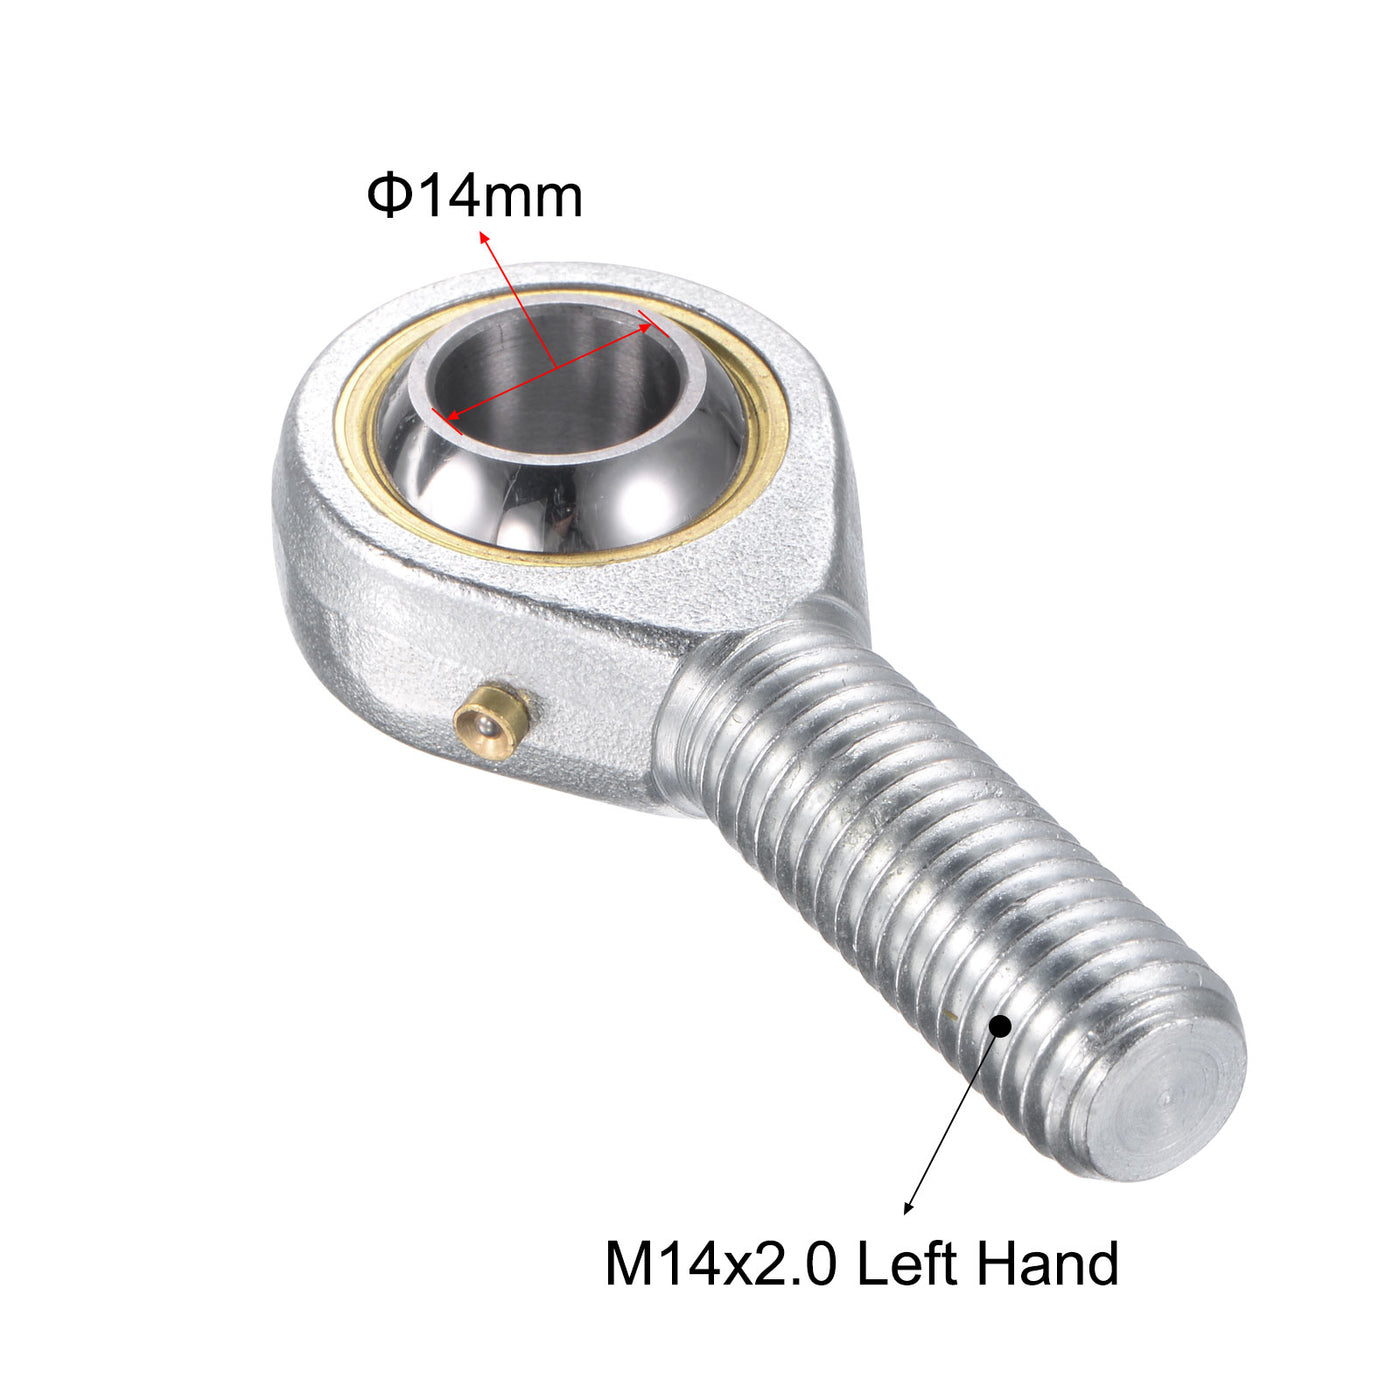 uxcell Uxcell POS14 Rod End Bearing 14mm Bore Self-lubricated M14x2.0 Left Hand Male Thread